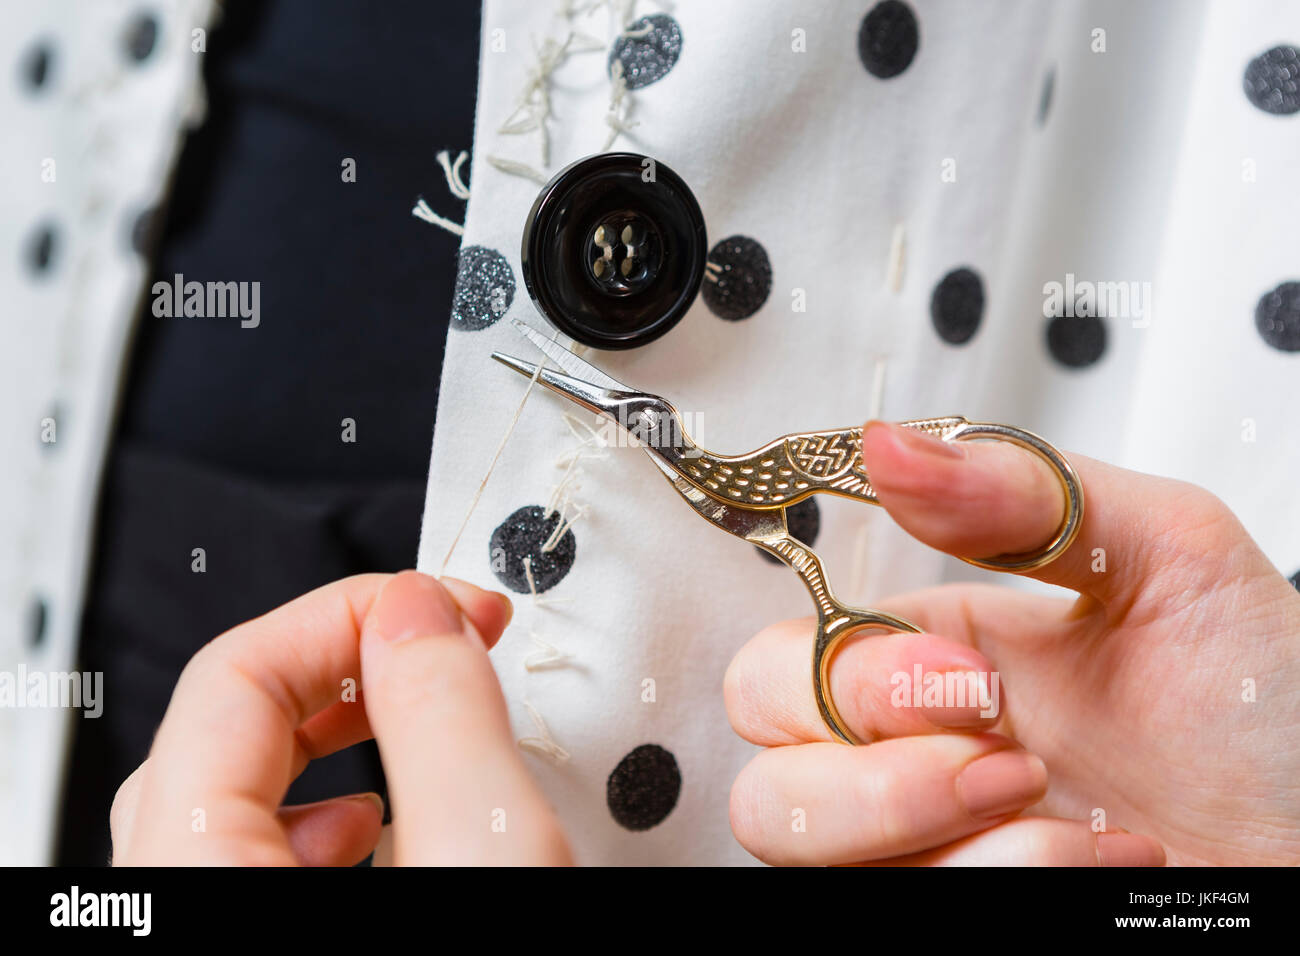 Woman's hands stitching button on a dress, close-up Stock Photo